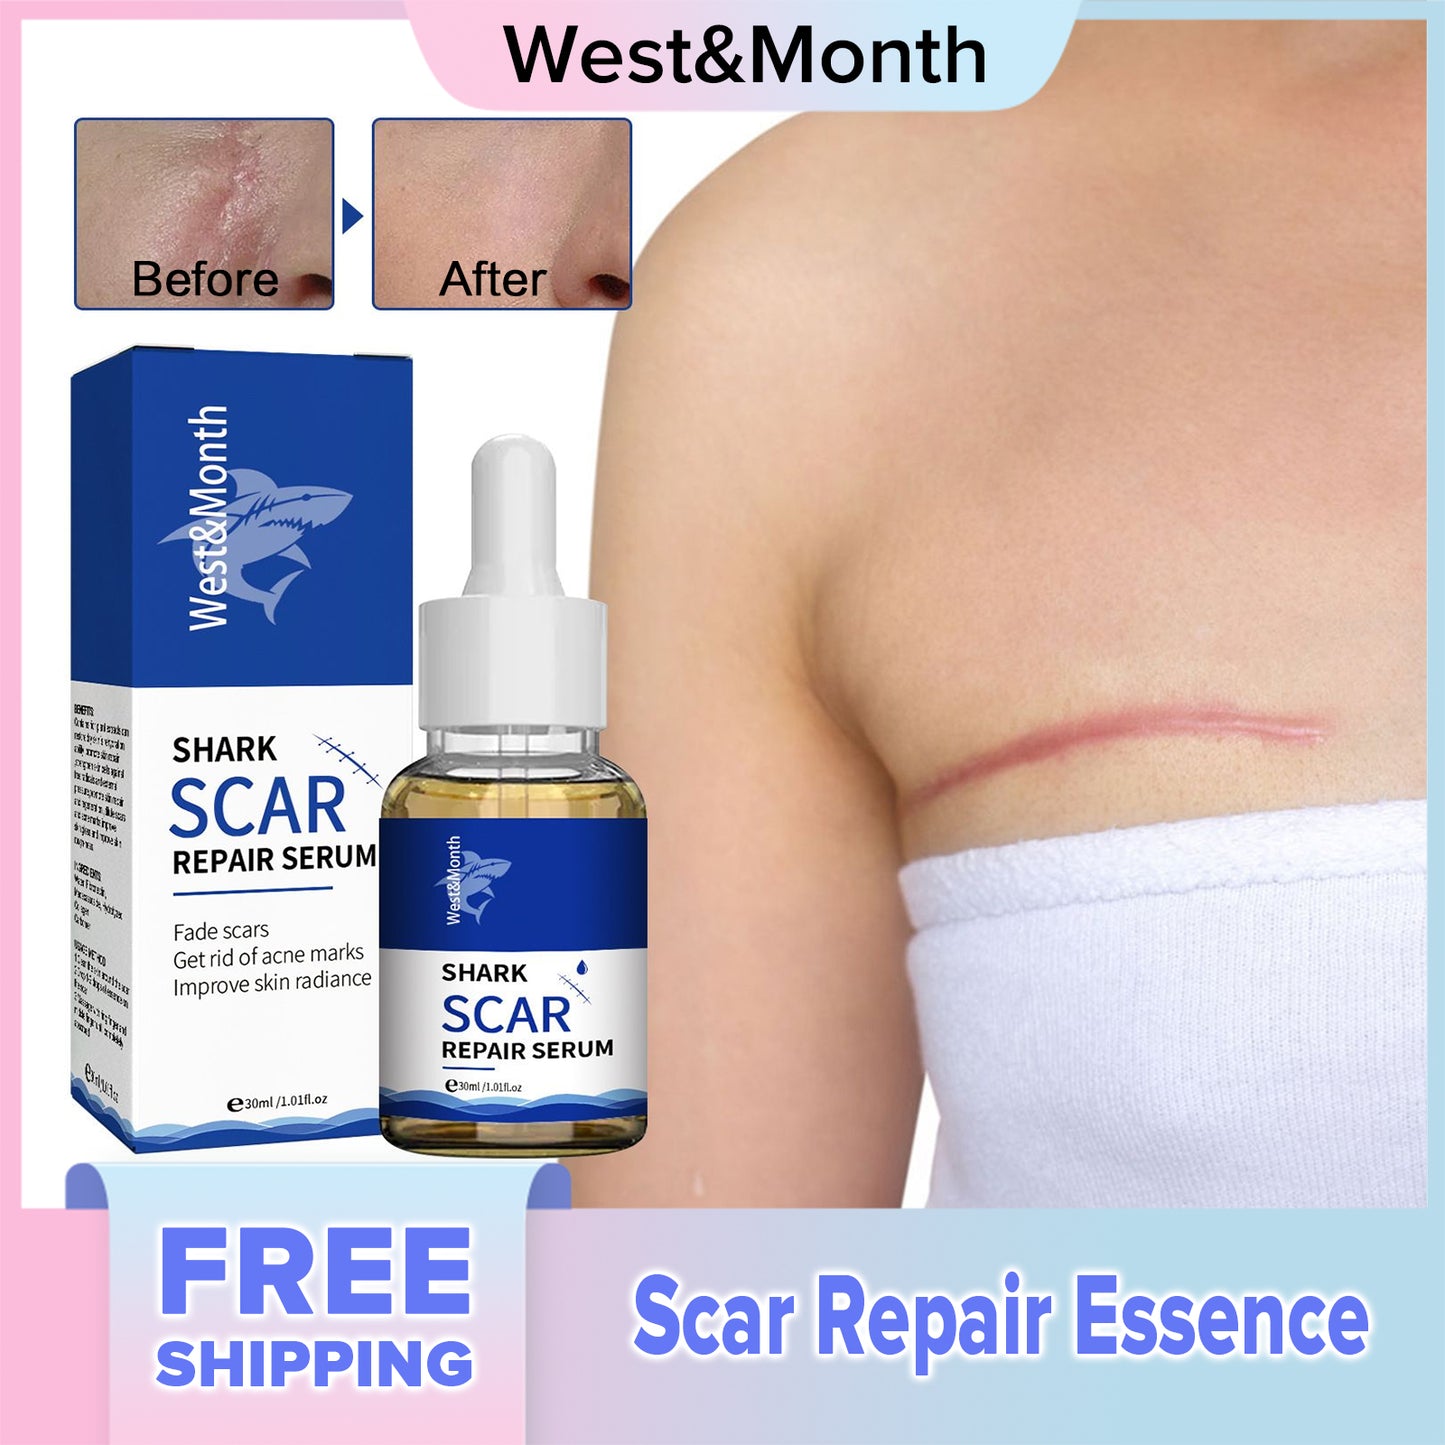 West&Month Scar Repair Essence Fade Concave And Convex Scars Repair Pockmarks Pit Pockmarks Tender And Smooth Skin Essence(30ml)